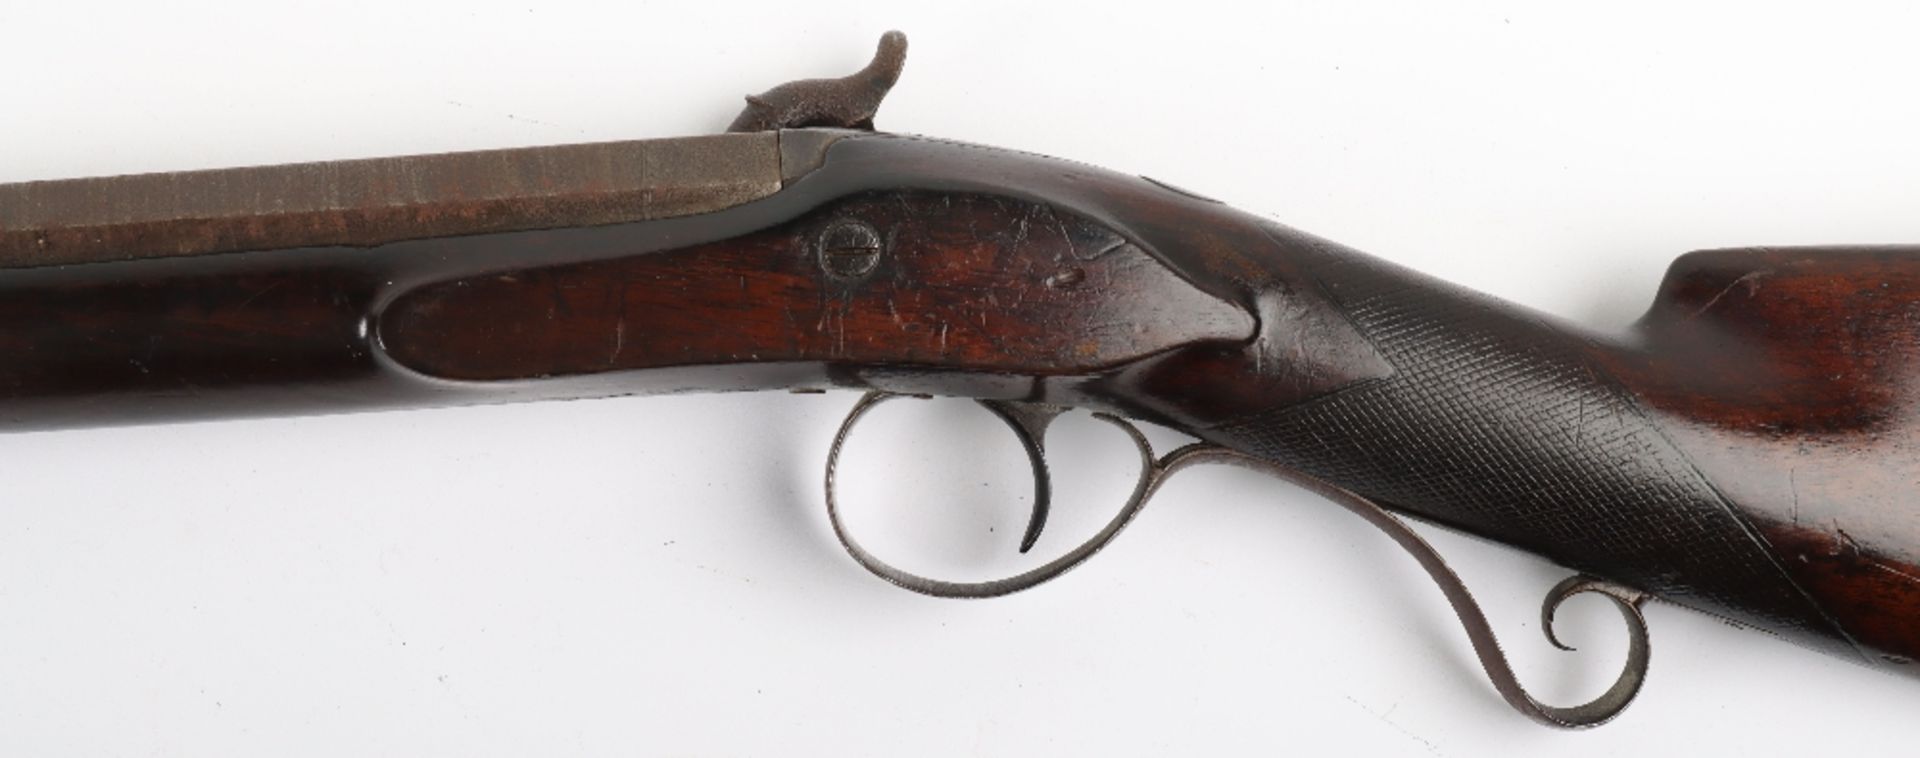 16 Bore Percussion Sporting Gun by Lacy & Co - Image 9 of 12